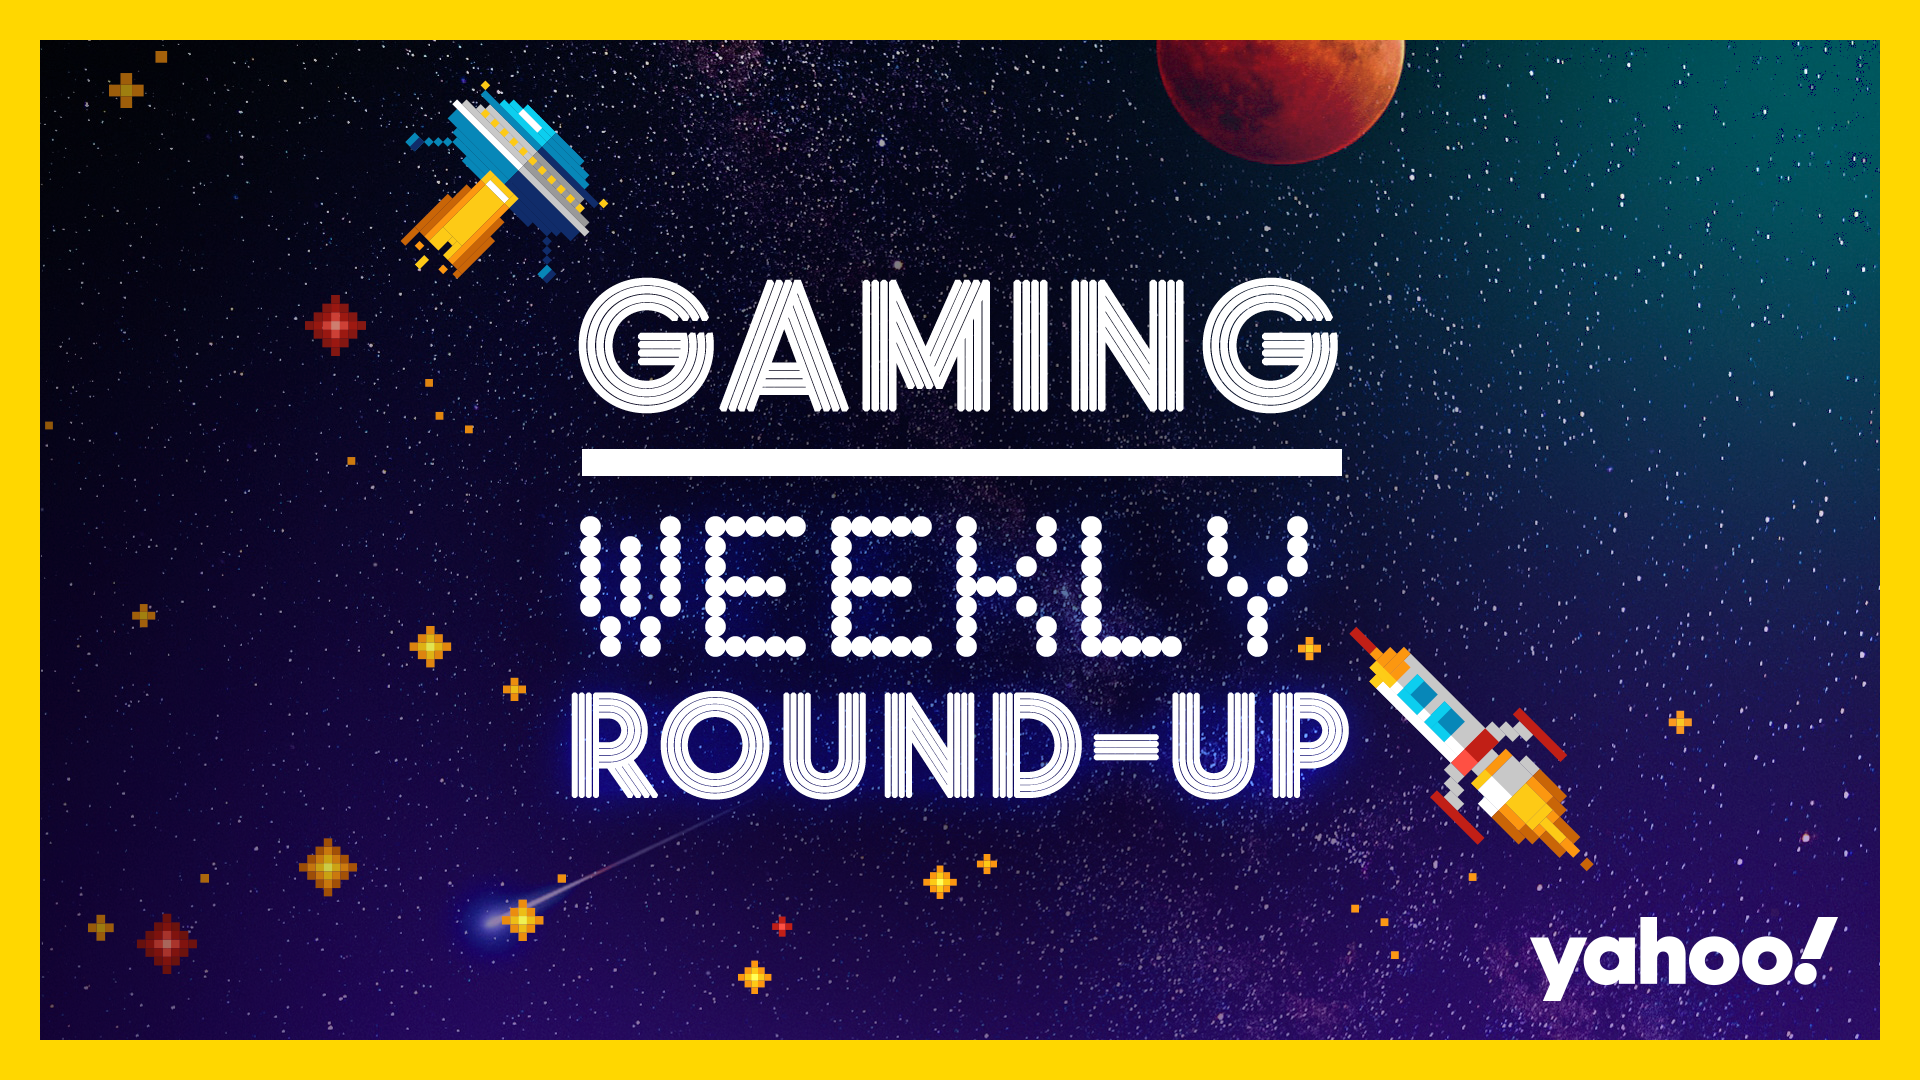 Star Wars games are not exclusives anymore, RTX 3060, Cyberpunk 2077 roadmap, Razer's RGB mask - Weekly Gaming Roundup: 15 Jan 2021